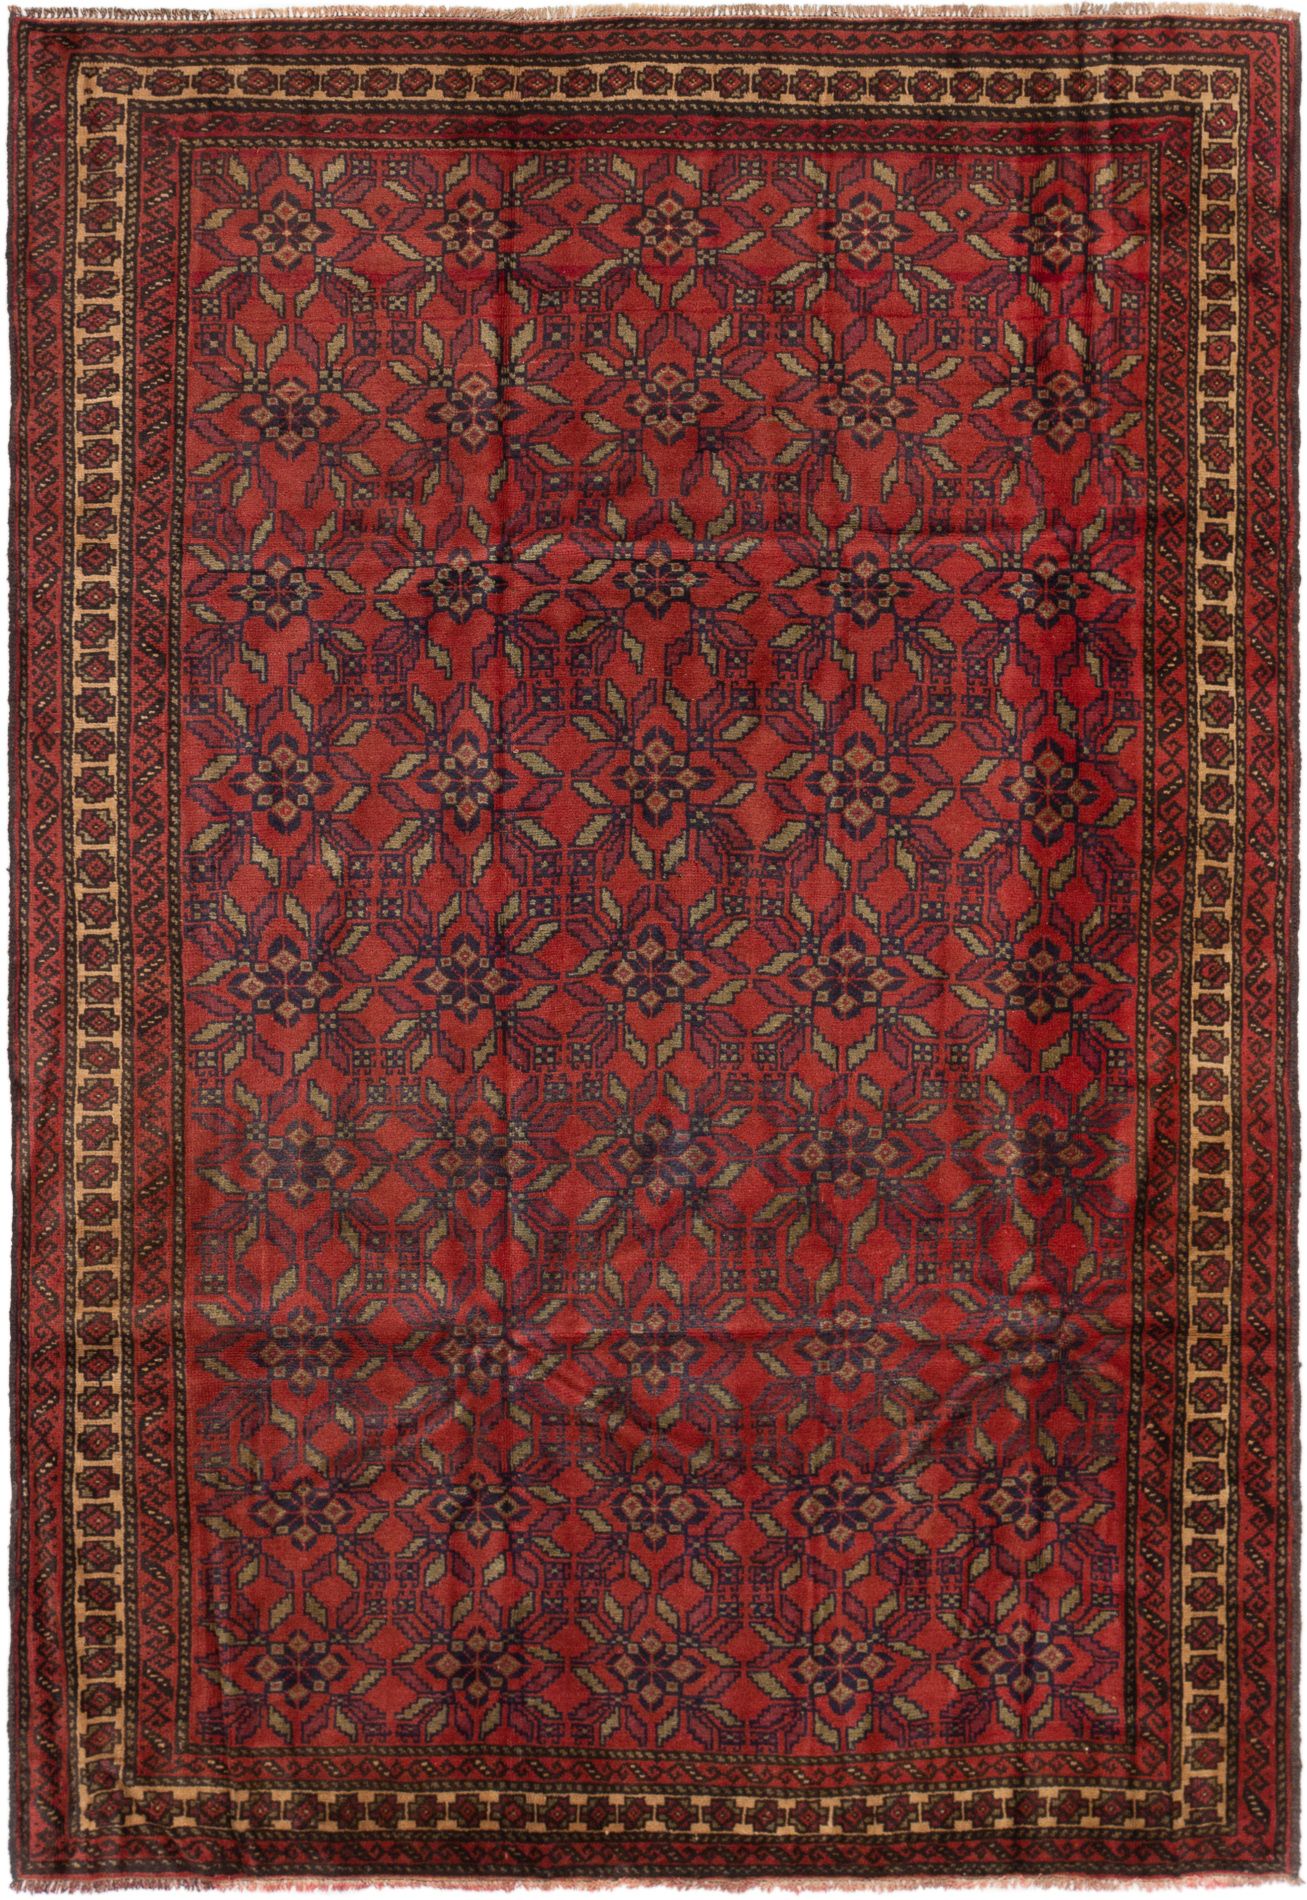 Hand-knotted Teimani Red Wool Rug 6'8" x 9'6" Size: 6'8" x 9'6"  